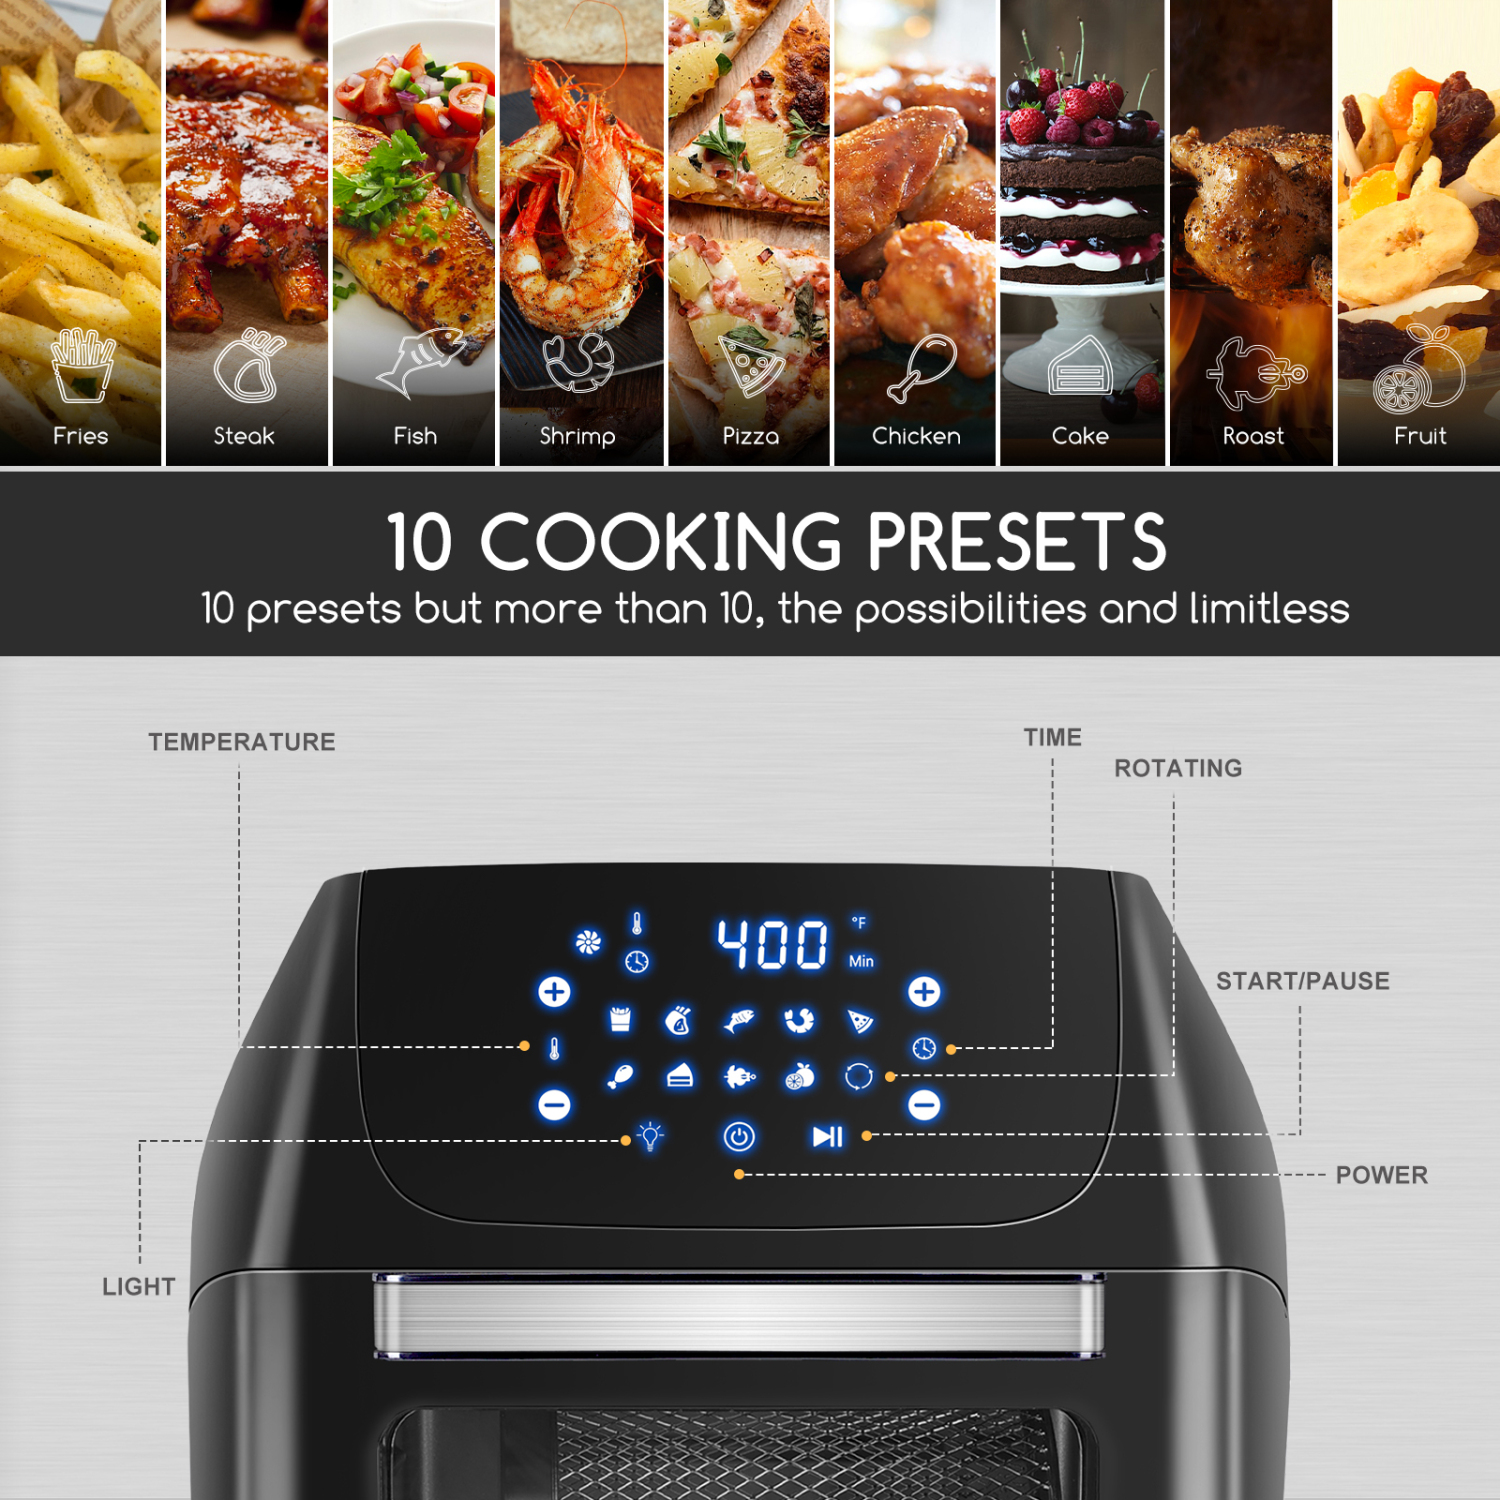 Aigostar 10-in-1 Air Fryer Oven, 13 QT Air Fryer with Rotisserie, Dehydrator, Convection Oven, Removable Door and Smart One Touch Cooking, 6 Accessories, 1500W Family Size Air Fryer Oven Combo, Black